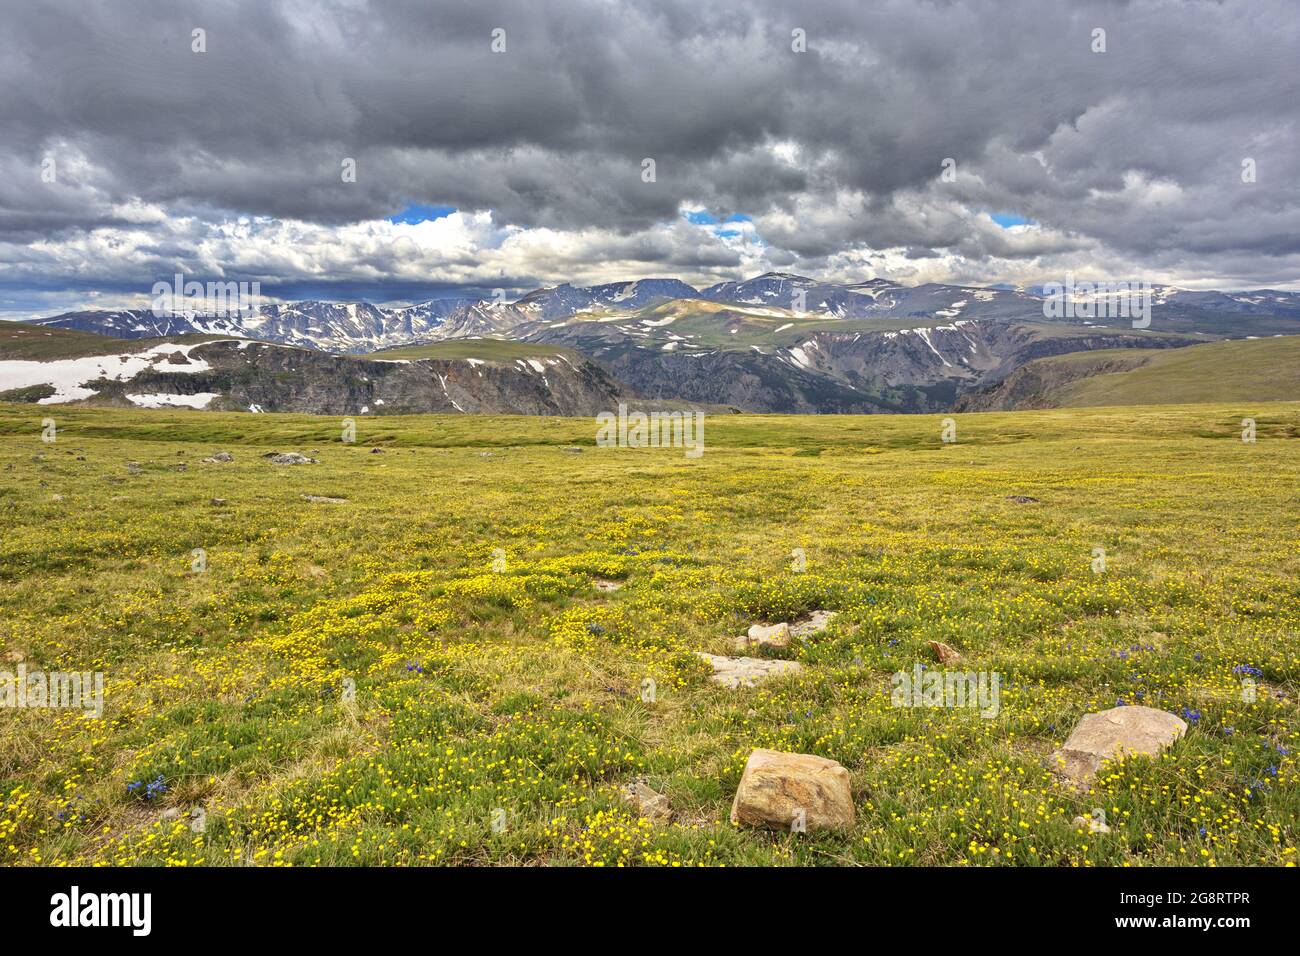 Absaroka Range of Rocky Mountains seen from Beartooth Highway, a National Scenic Byway northeast of Yellowstone National Park Stock Photo